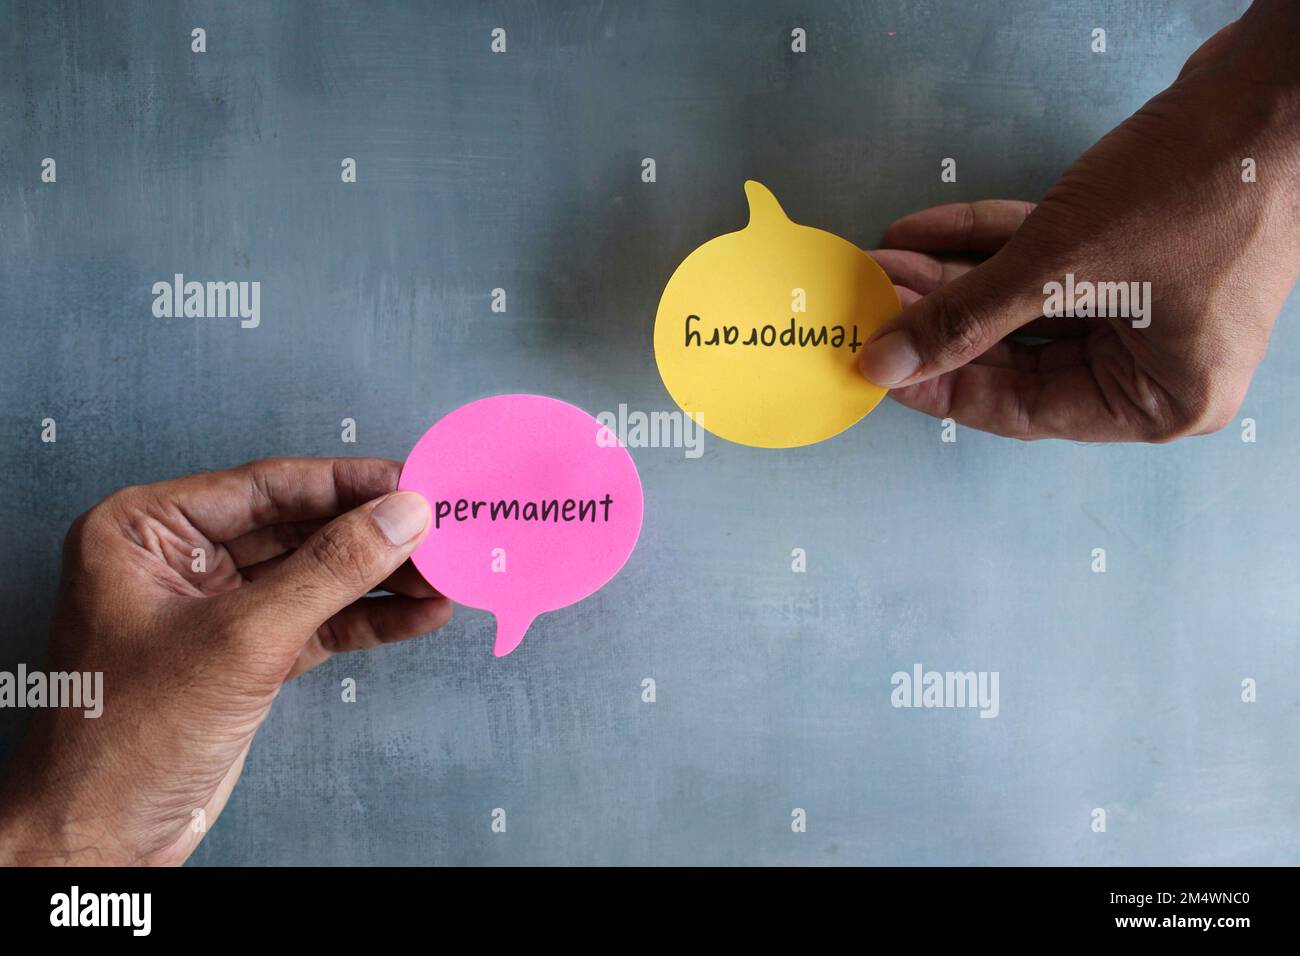 Top view image of speech bubble with text TEMPORARY and PERMANENT. Business and finance concept Stock Photo